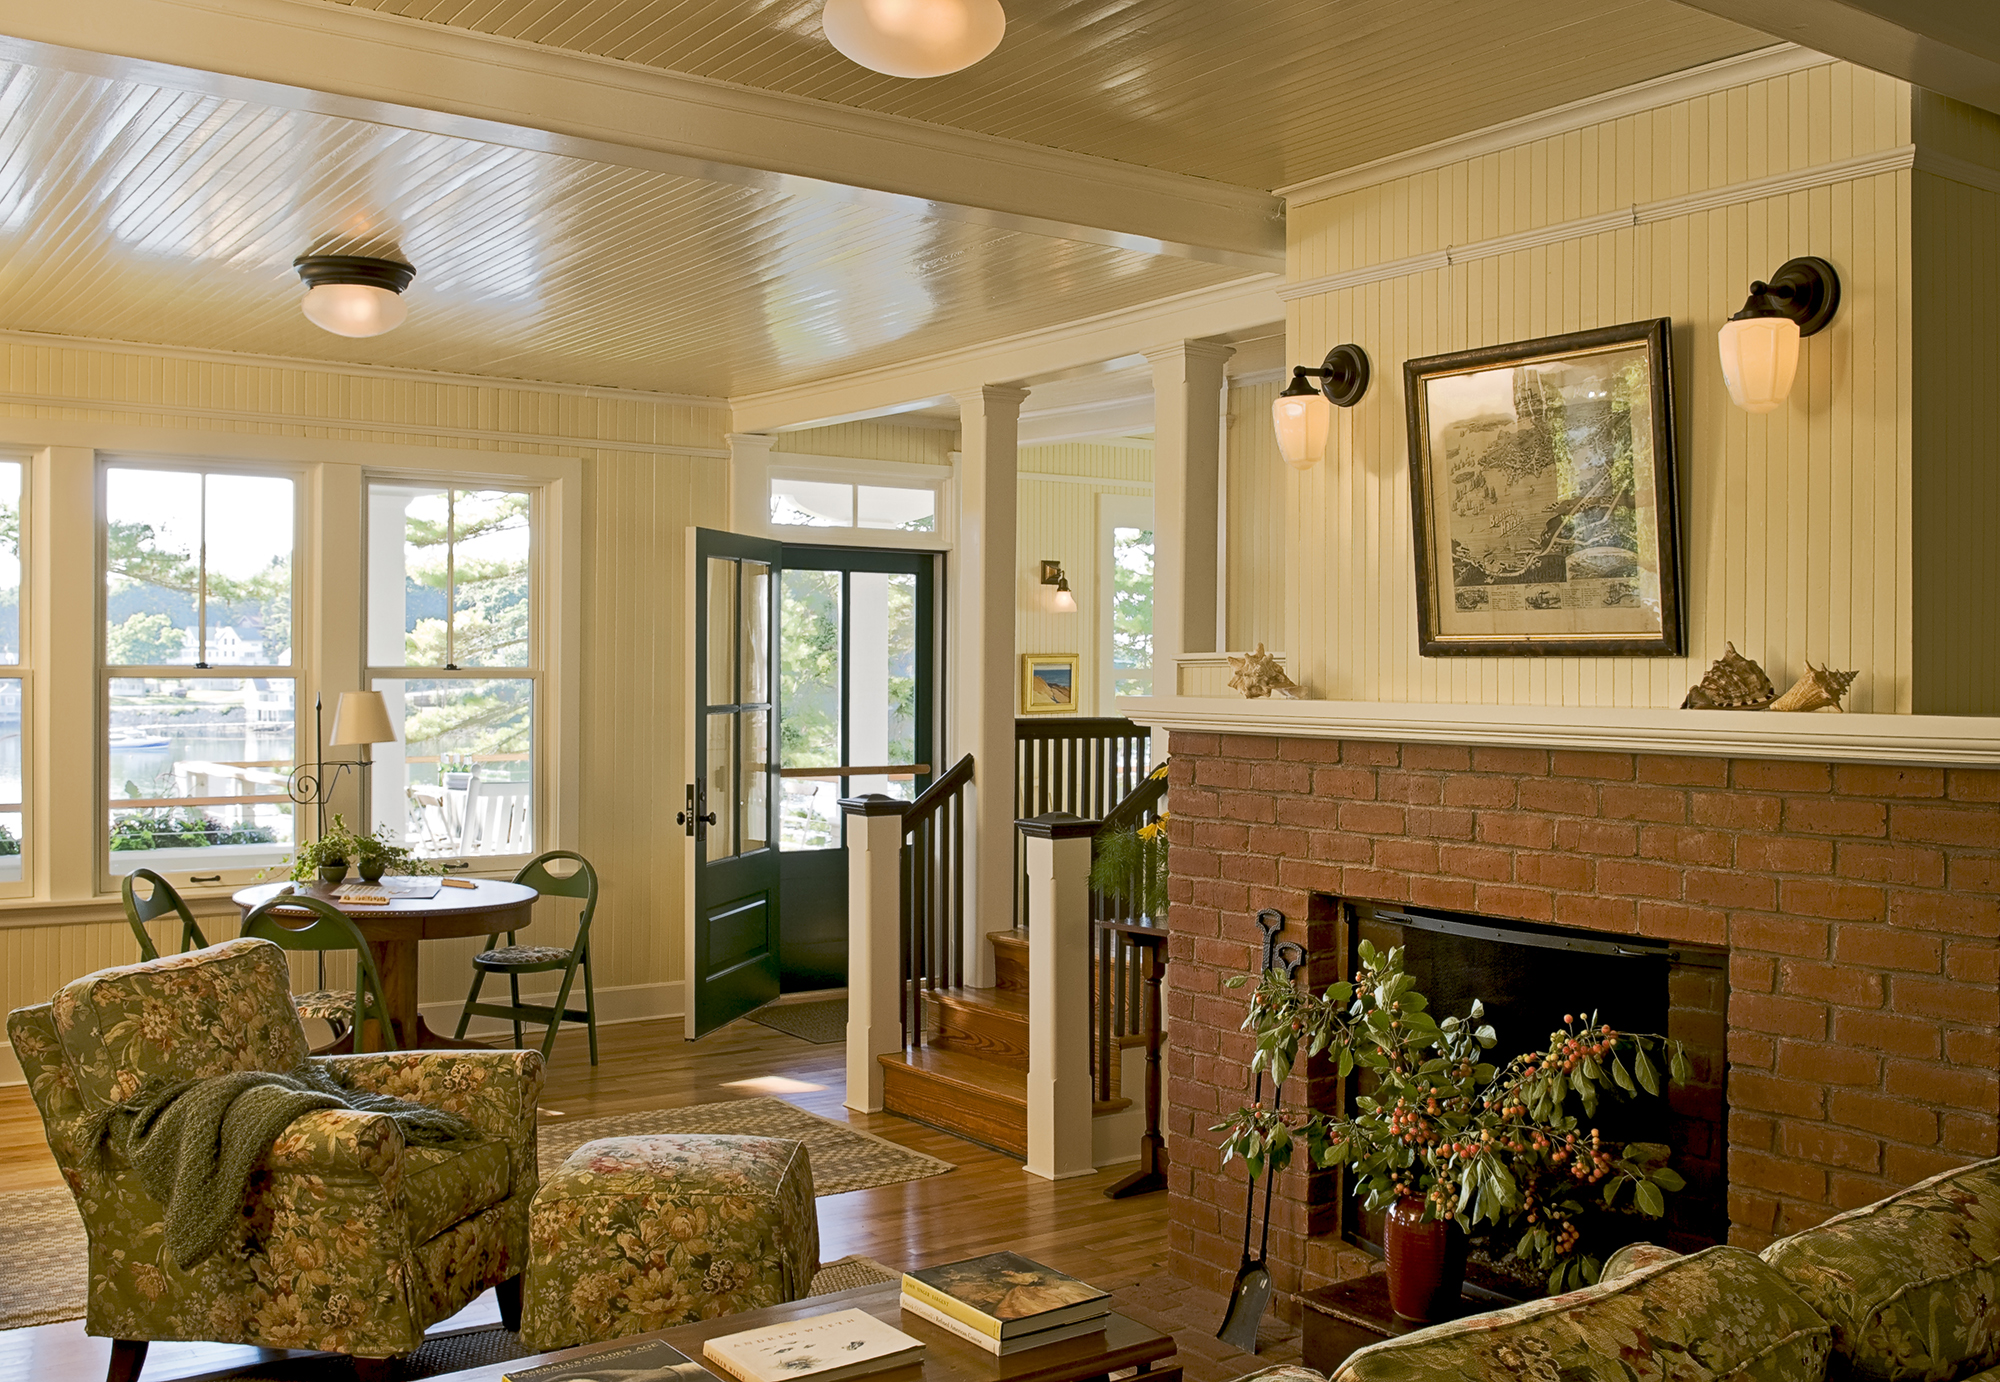 Brick hearth with paneled walls and ceilings